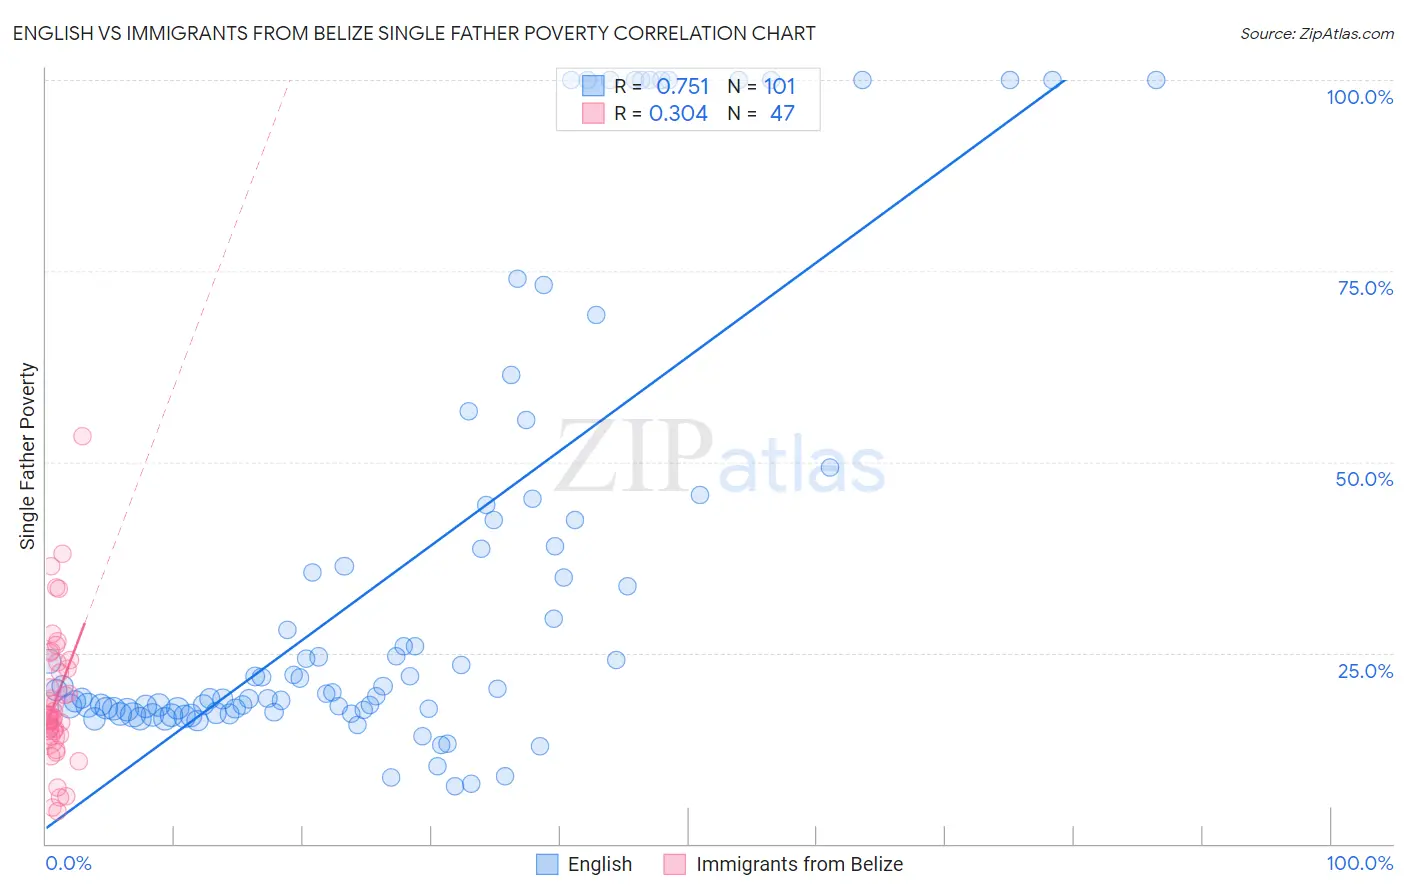 English vs Immigrants from Belize Single Father Poverty